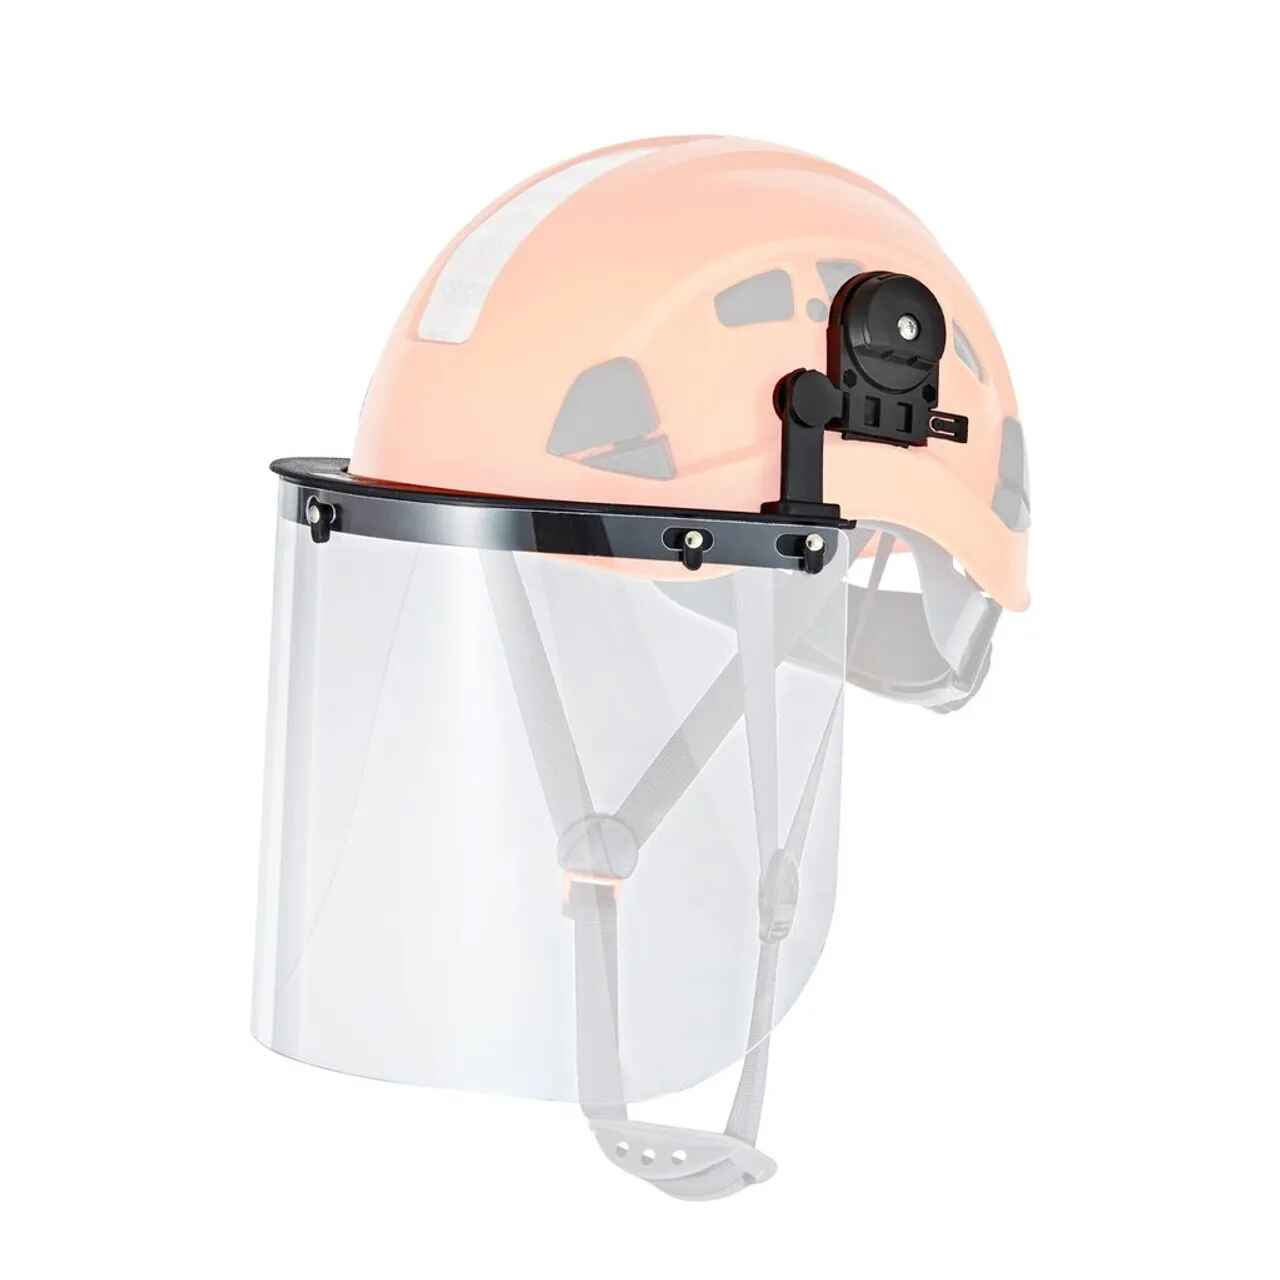 Z87 Face Shield and Mounting Bracket for Safety Helmets (H1 Series) - Defender Safety